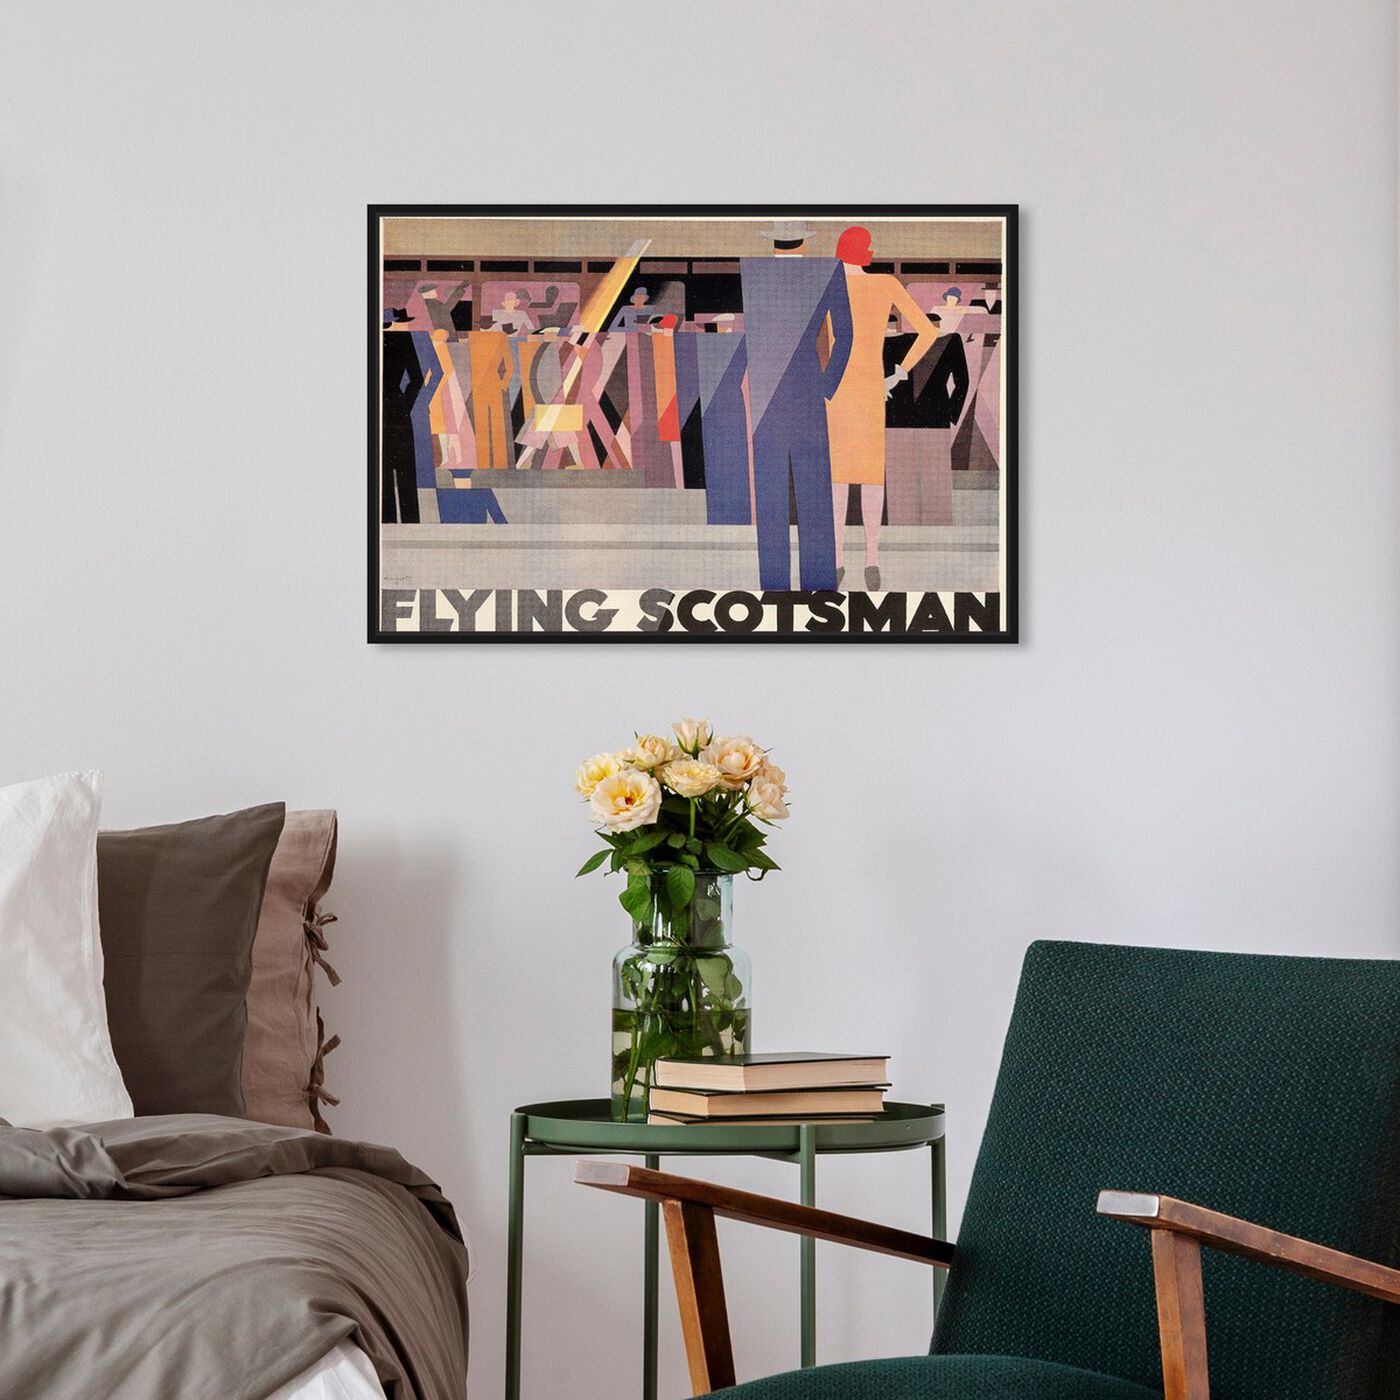 Hanging view of Flying Scotsman featuring advertising and posters art.